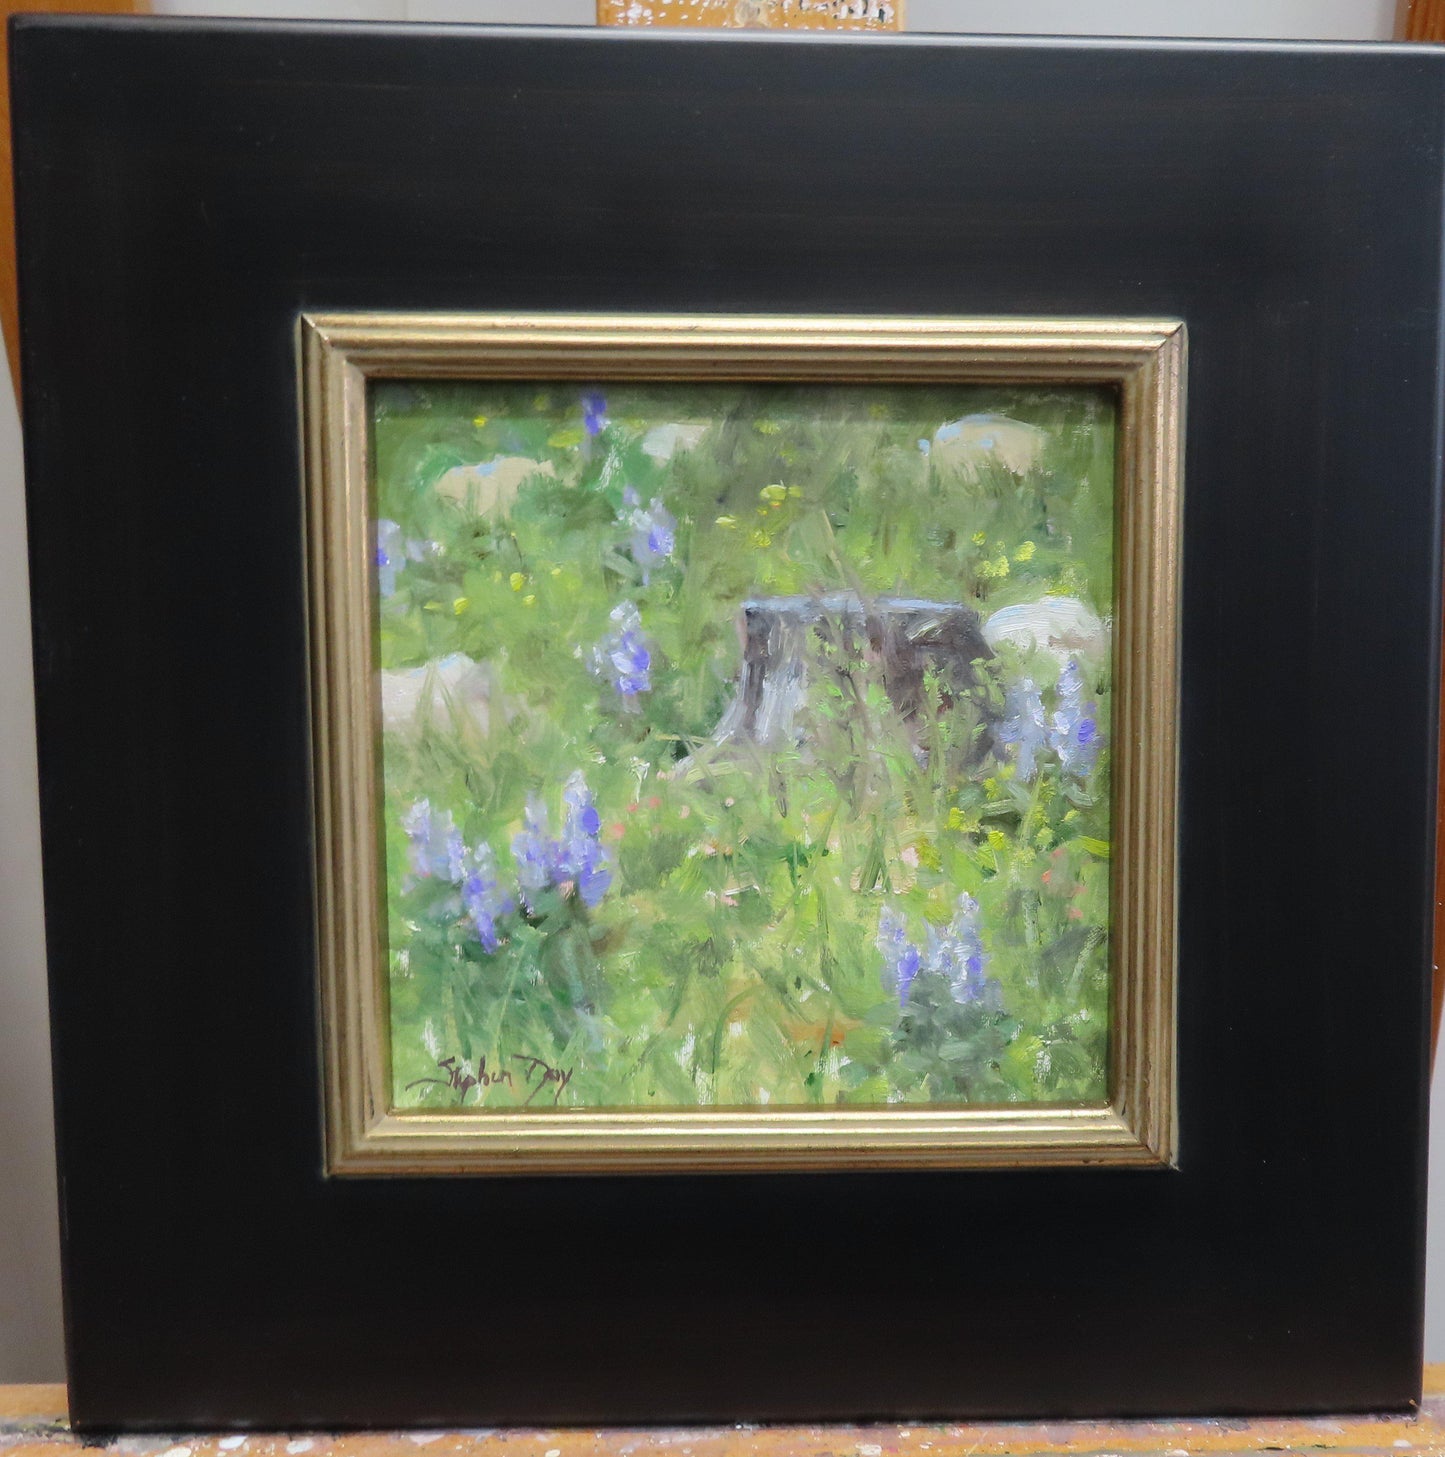 Mountain Meadow Spring-Painting-Stephen Day-Sorrel Sky Gallery